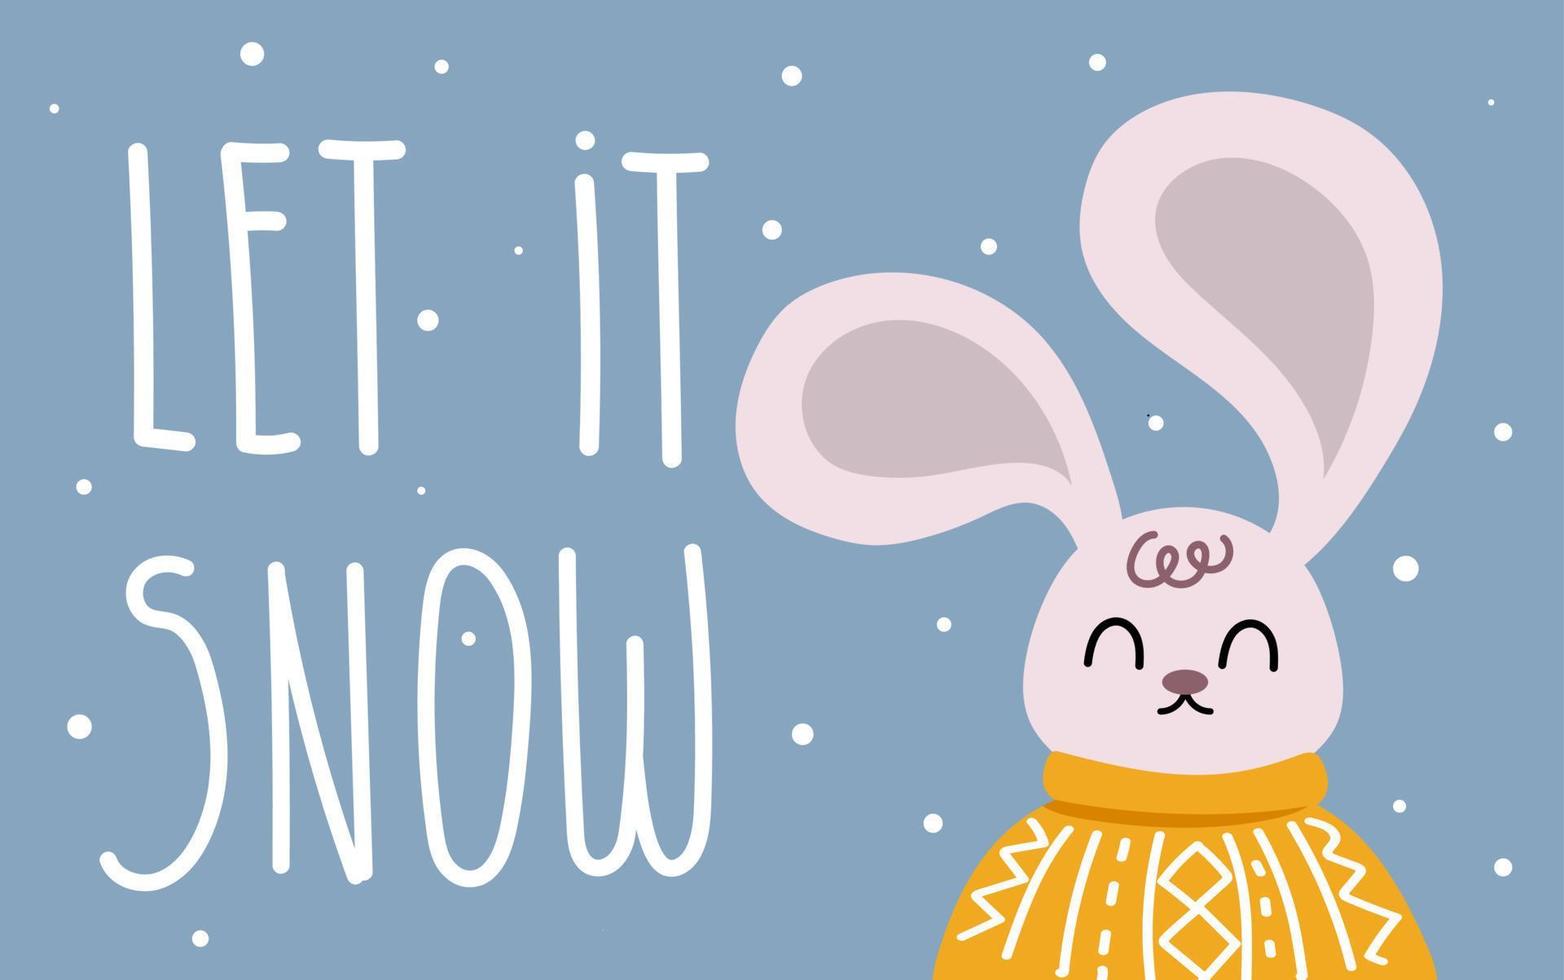 Greeting card with a rabbit Let it snow vector